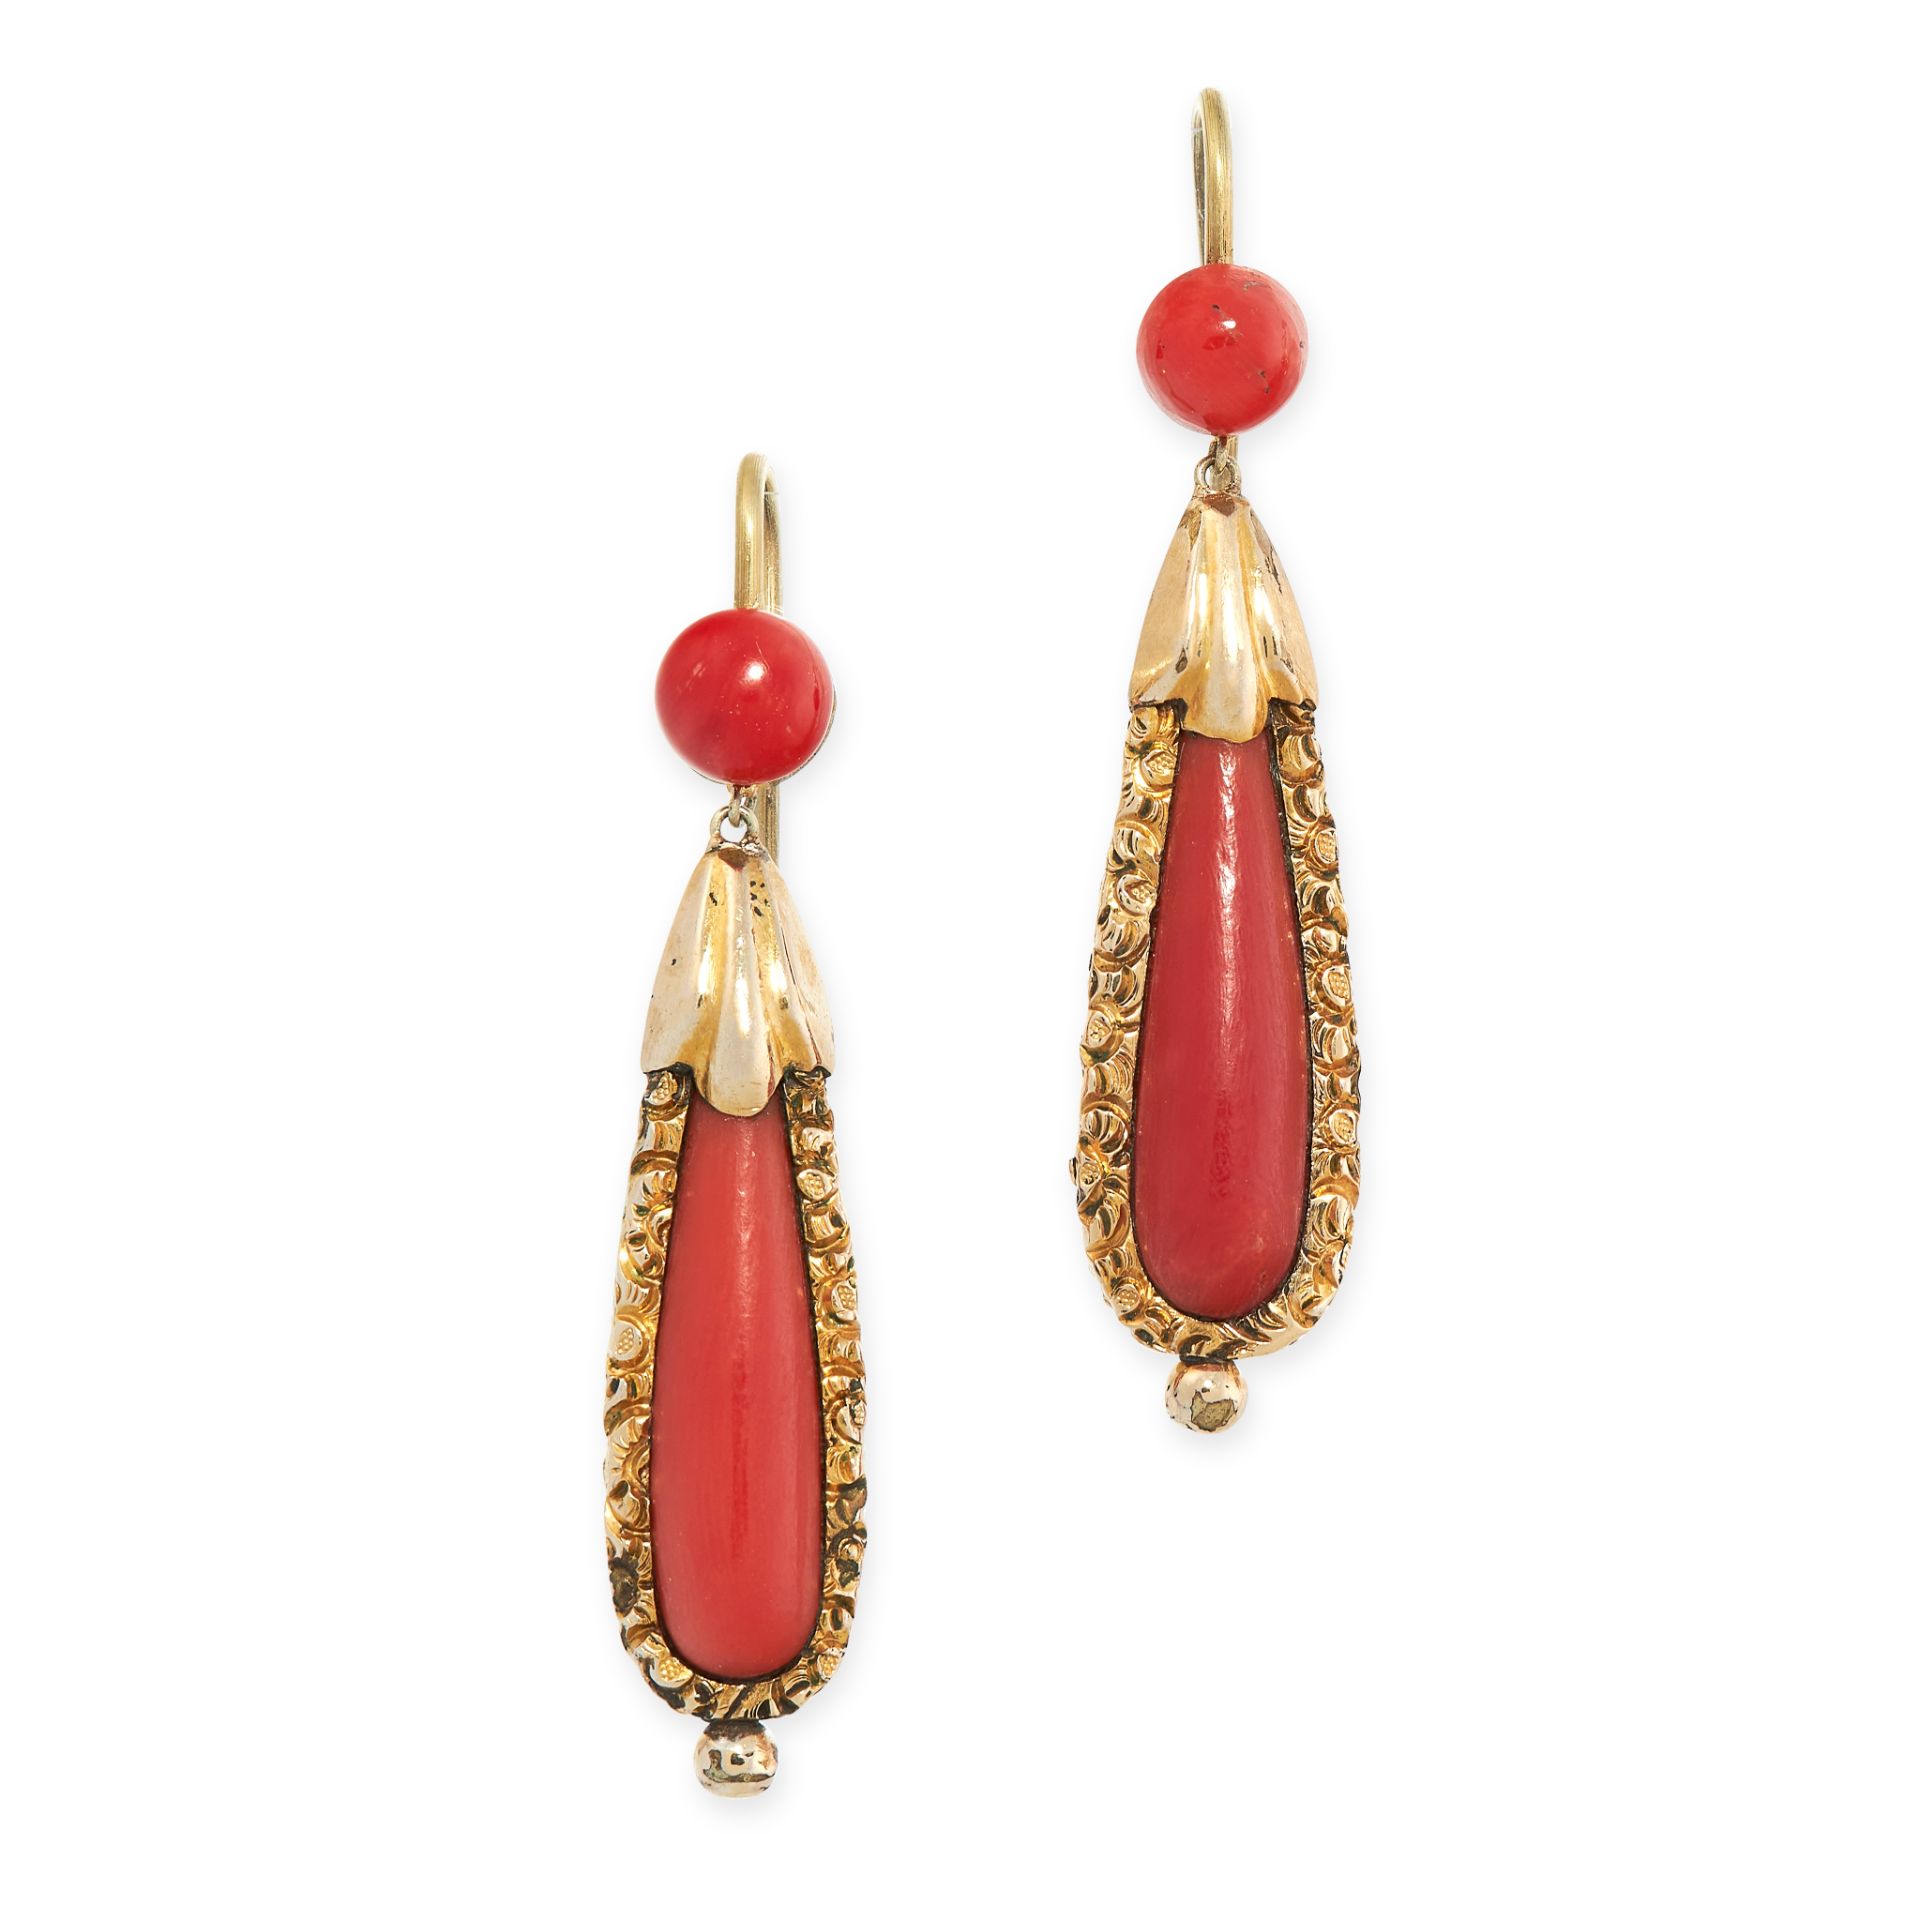 A PAIR OF ANTIQUE CORAL EARRINGS, 19TH CENTURY each set with a polished drop shaped coral within a